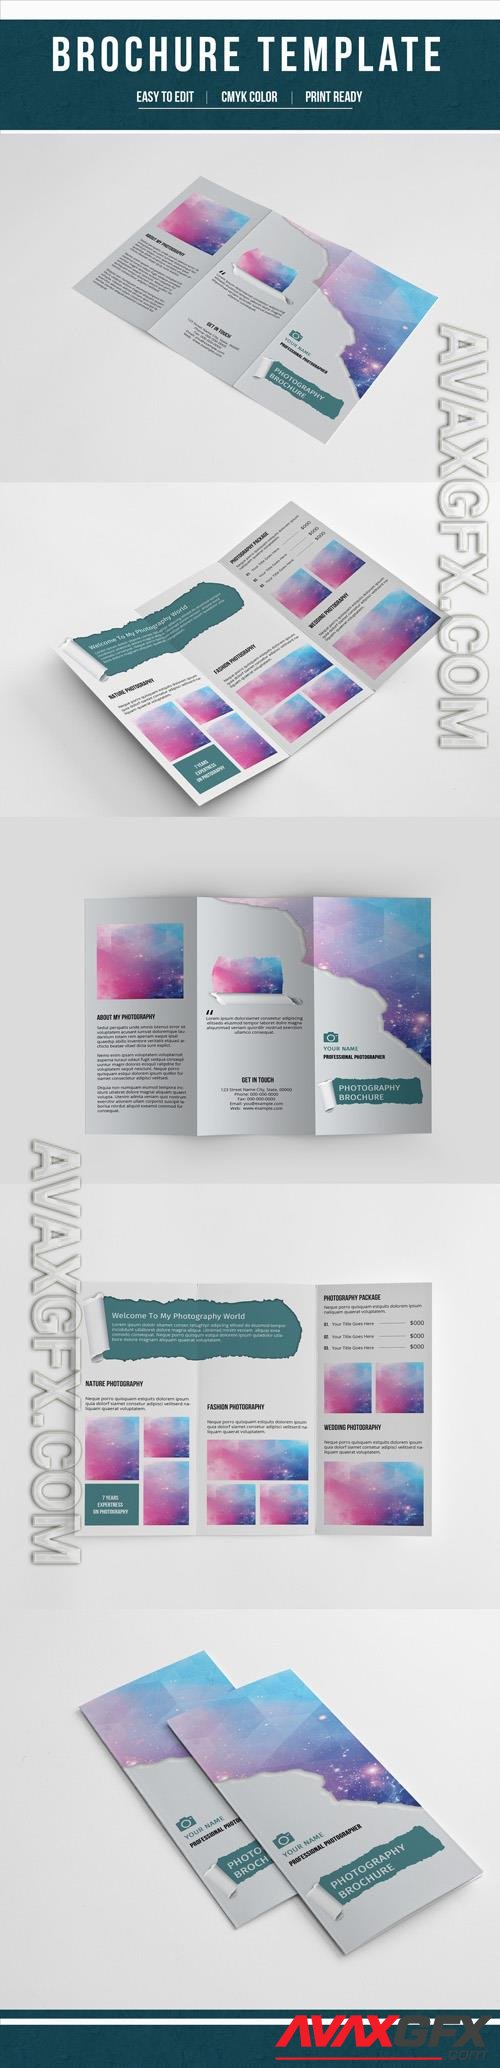 AdobeStock Trifold Brochure Layout with Paper Tear Element 4 189528172